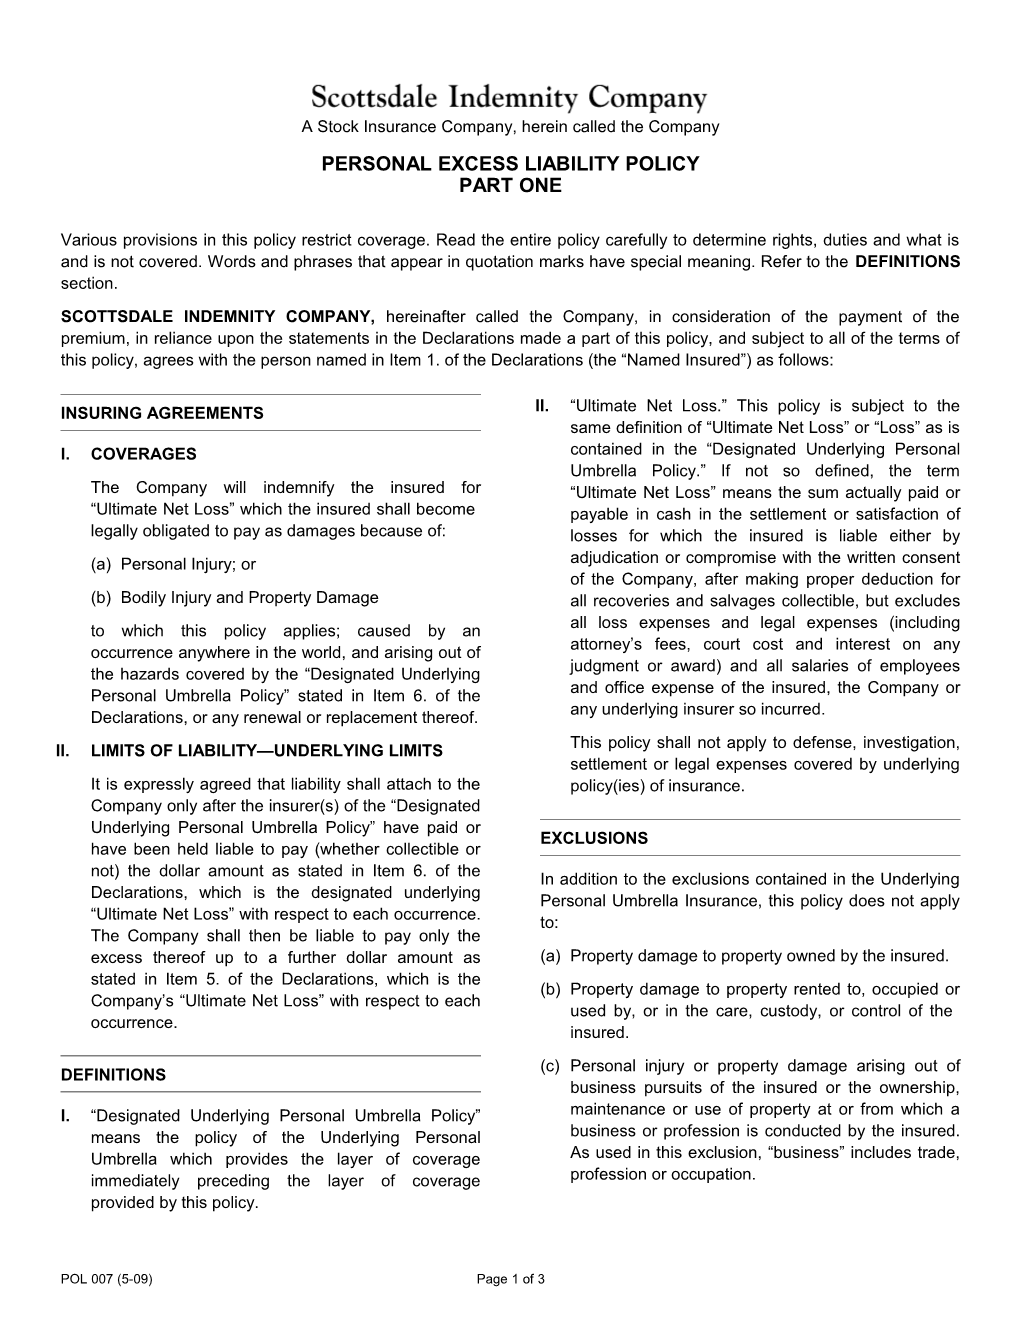 Personal Excess Liability Policy Part One